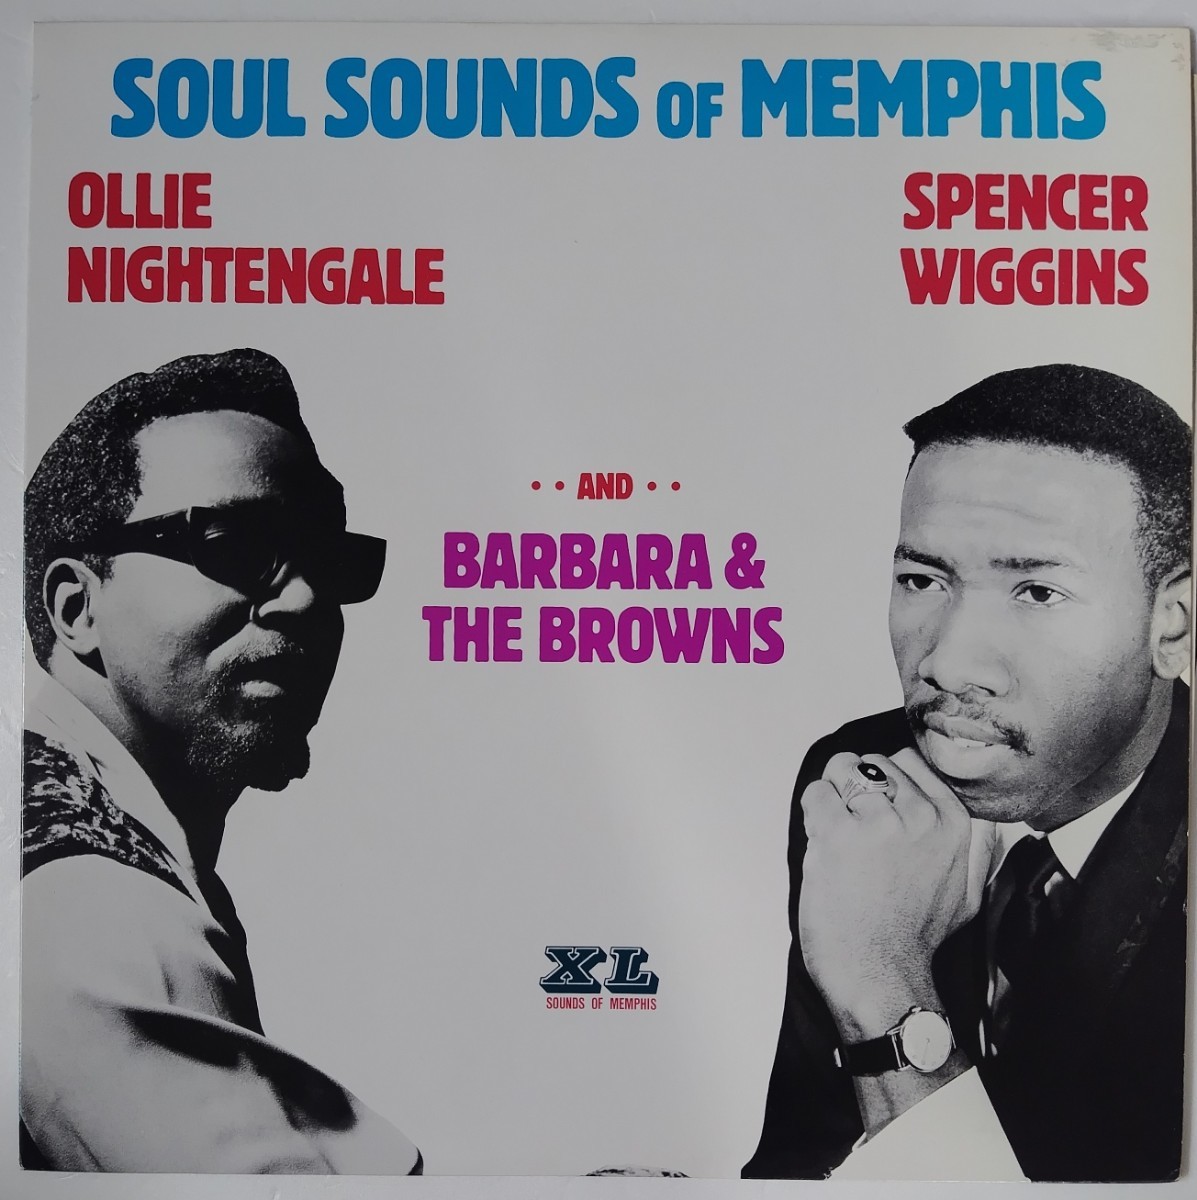 Ollie Nightengale- Spencer Wiggins And Barbara & The Browns Soul Sounds Of Memphis/XL Sounds Of Memphis VS-1026/1986年国内盤_画像1